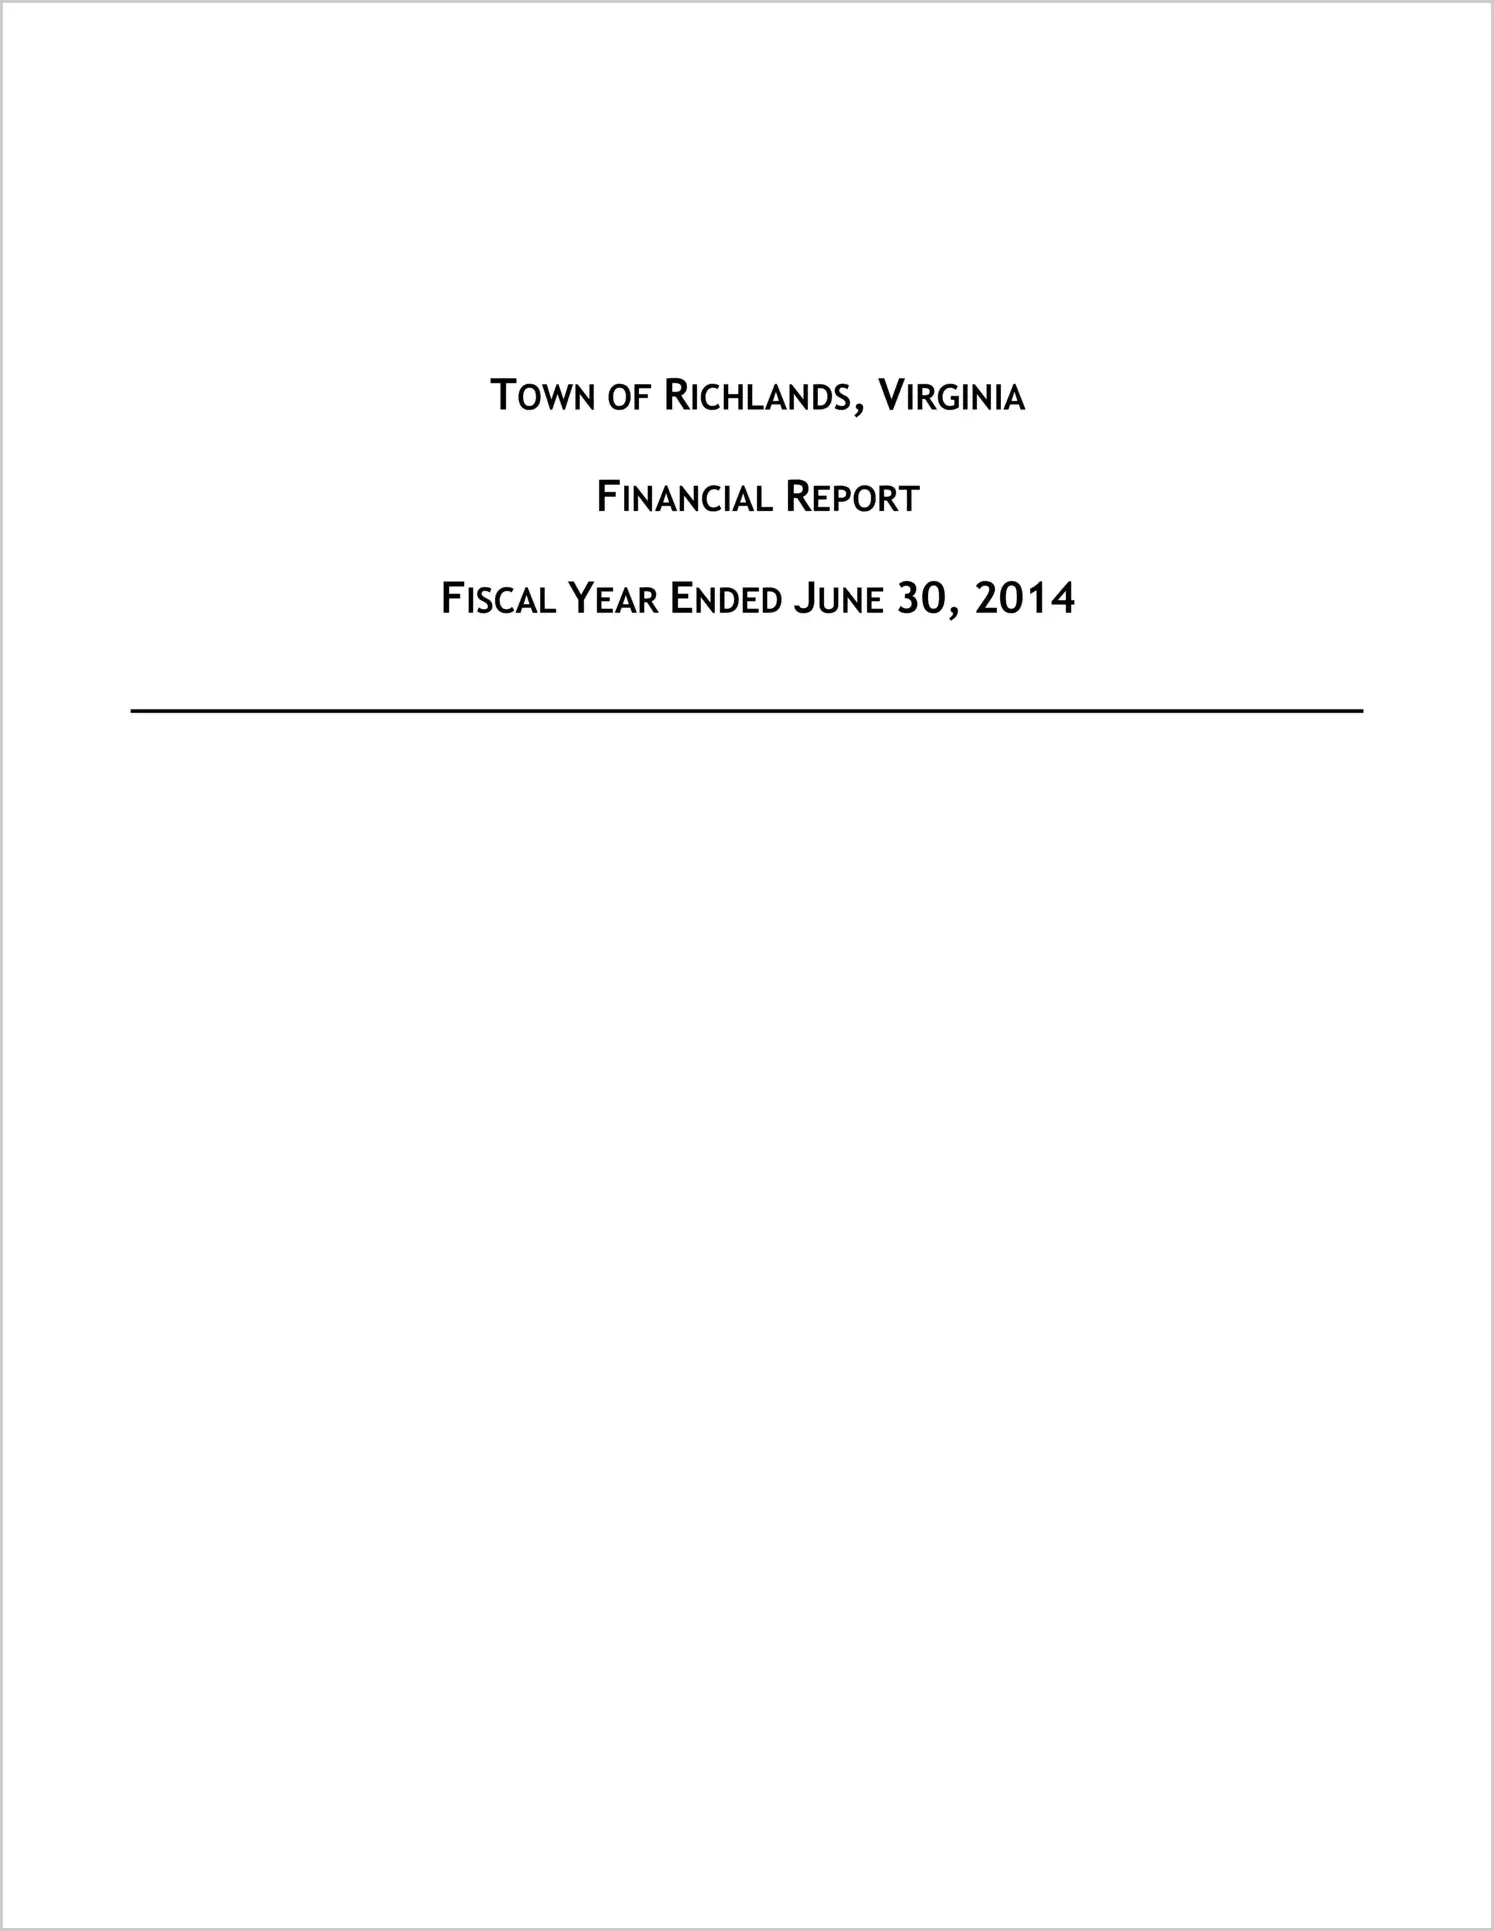 2014 Annual Financial Report for Town of Richlands